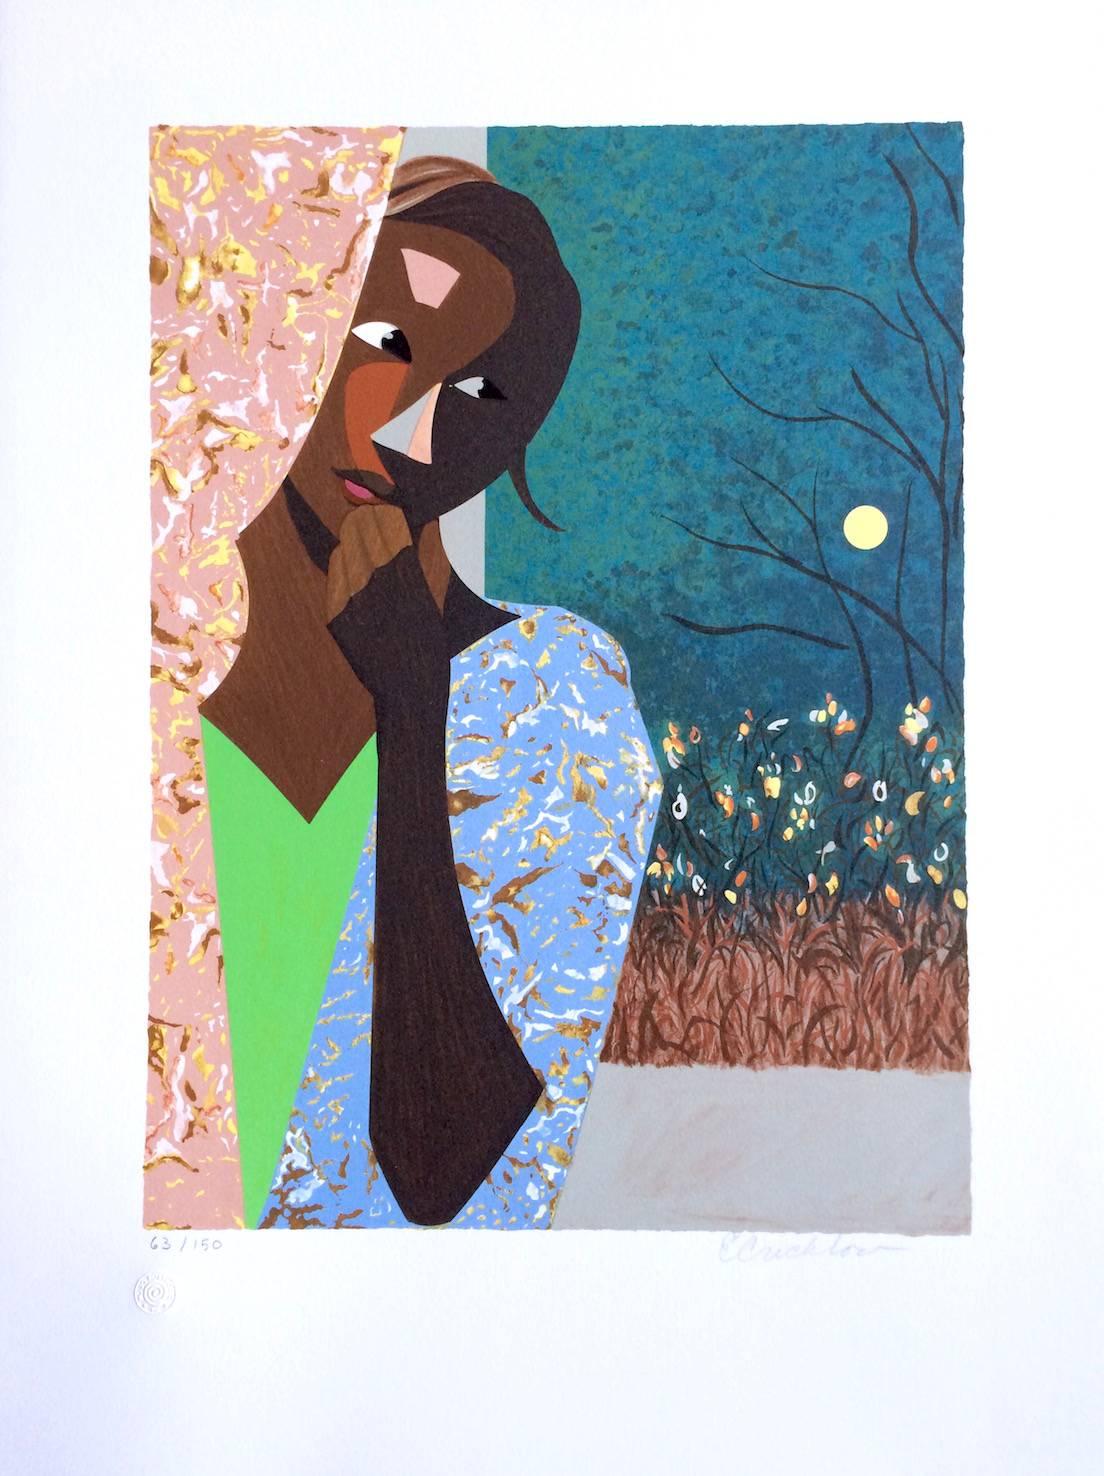 EVENING THOUGHTS Signed Lithograph, Young Black Female Portrait, Color Collage - Contemporary Print by Ernest Crichlow